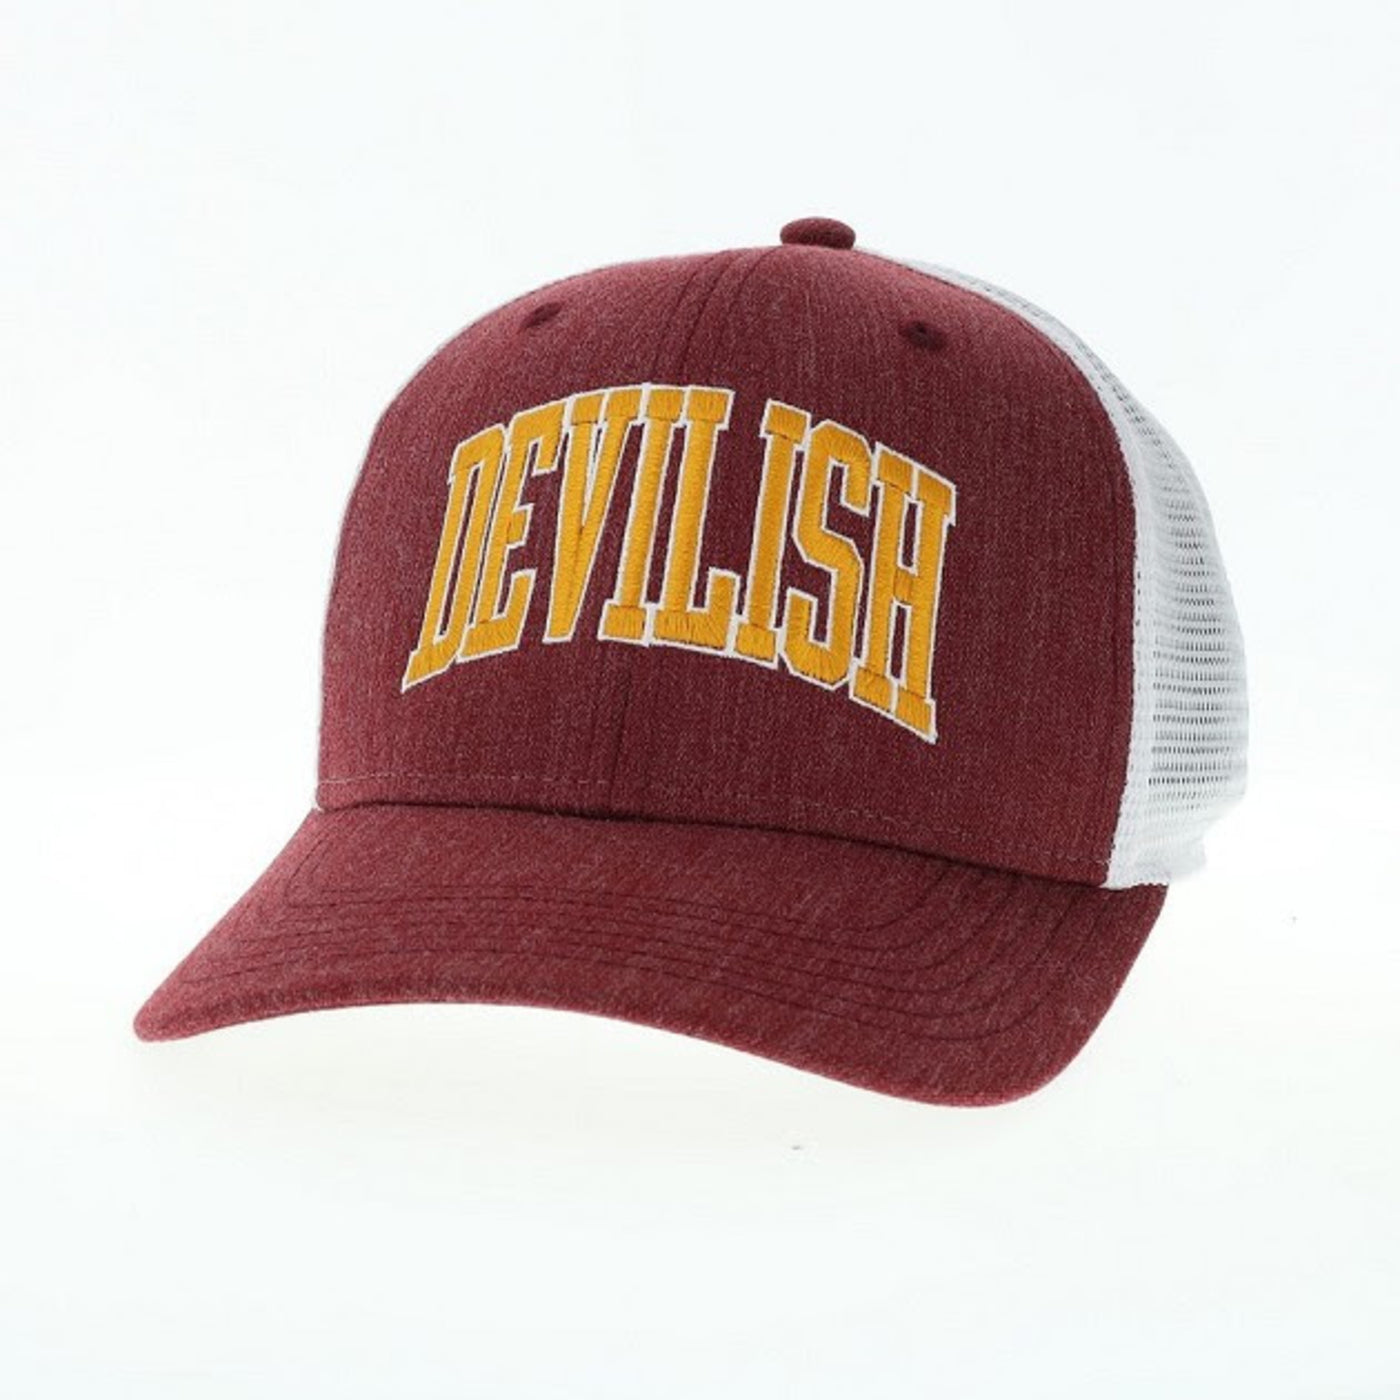 Shows the front view of a maroon and white trucker hat featuring 